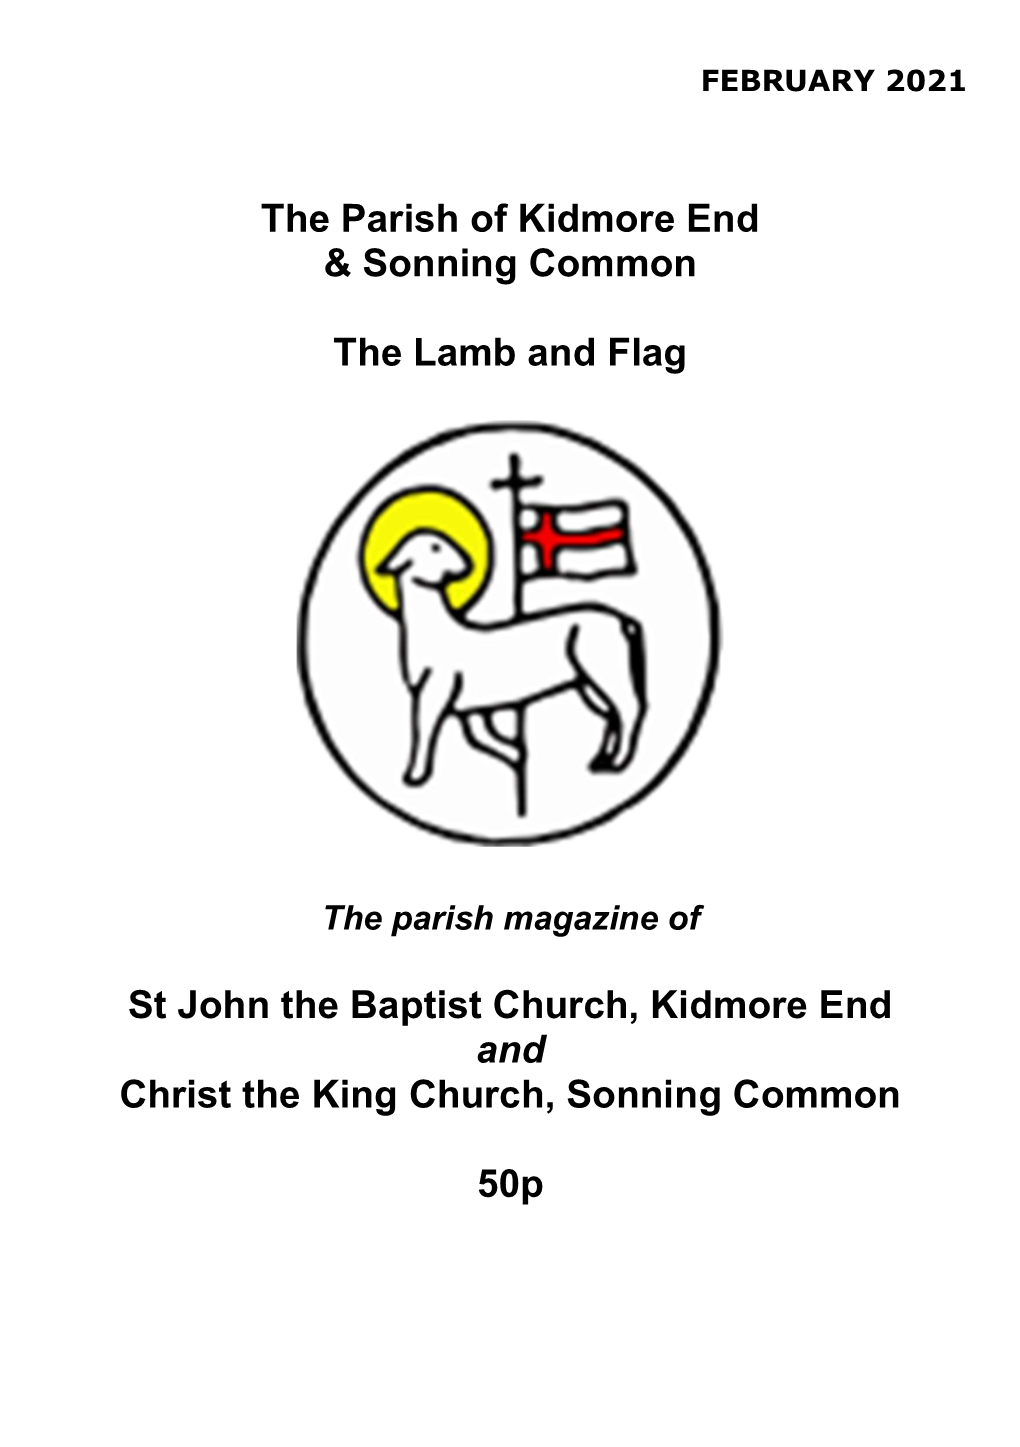 The Parish of Kidmore End & Sonning Common the Lamb and Flag St